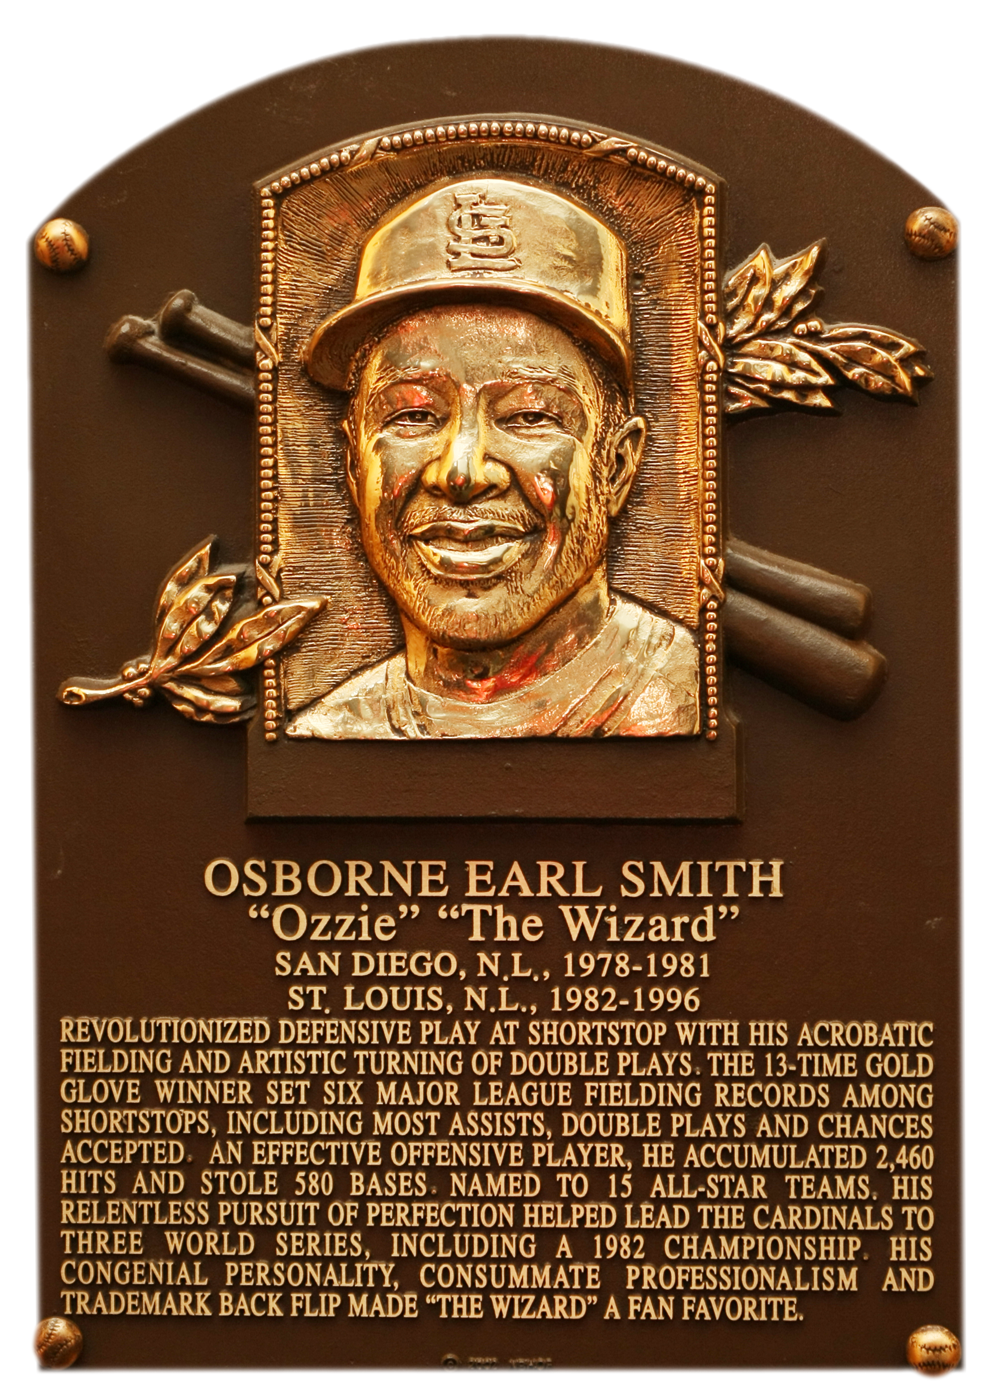 Ozzie Smith Hall of Fame plaque